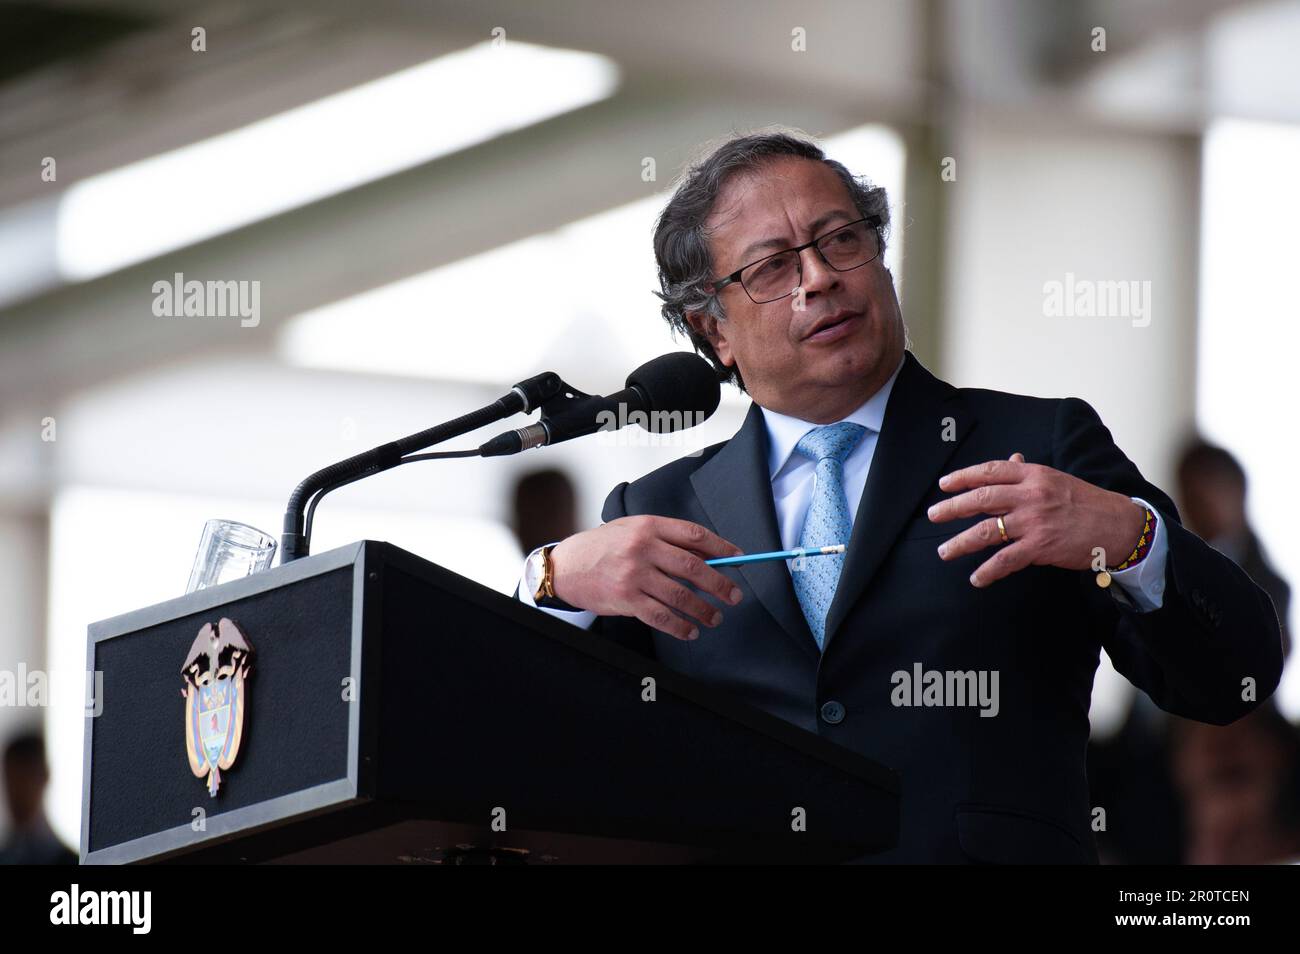 Bogota, Colombia. 09th May, 2023. Colombia's president Gustavo Petro gives a speach during the ceremony of the new Colombian Police Director William Rene Salamanca at the General Santander Police Academy in Bogota, Colombia. May 9, 2023. Photo by: Chepa Beltran/Long Visual Press Credit: Long Visual Press/Alamy Live News Stock Photo